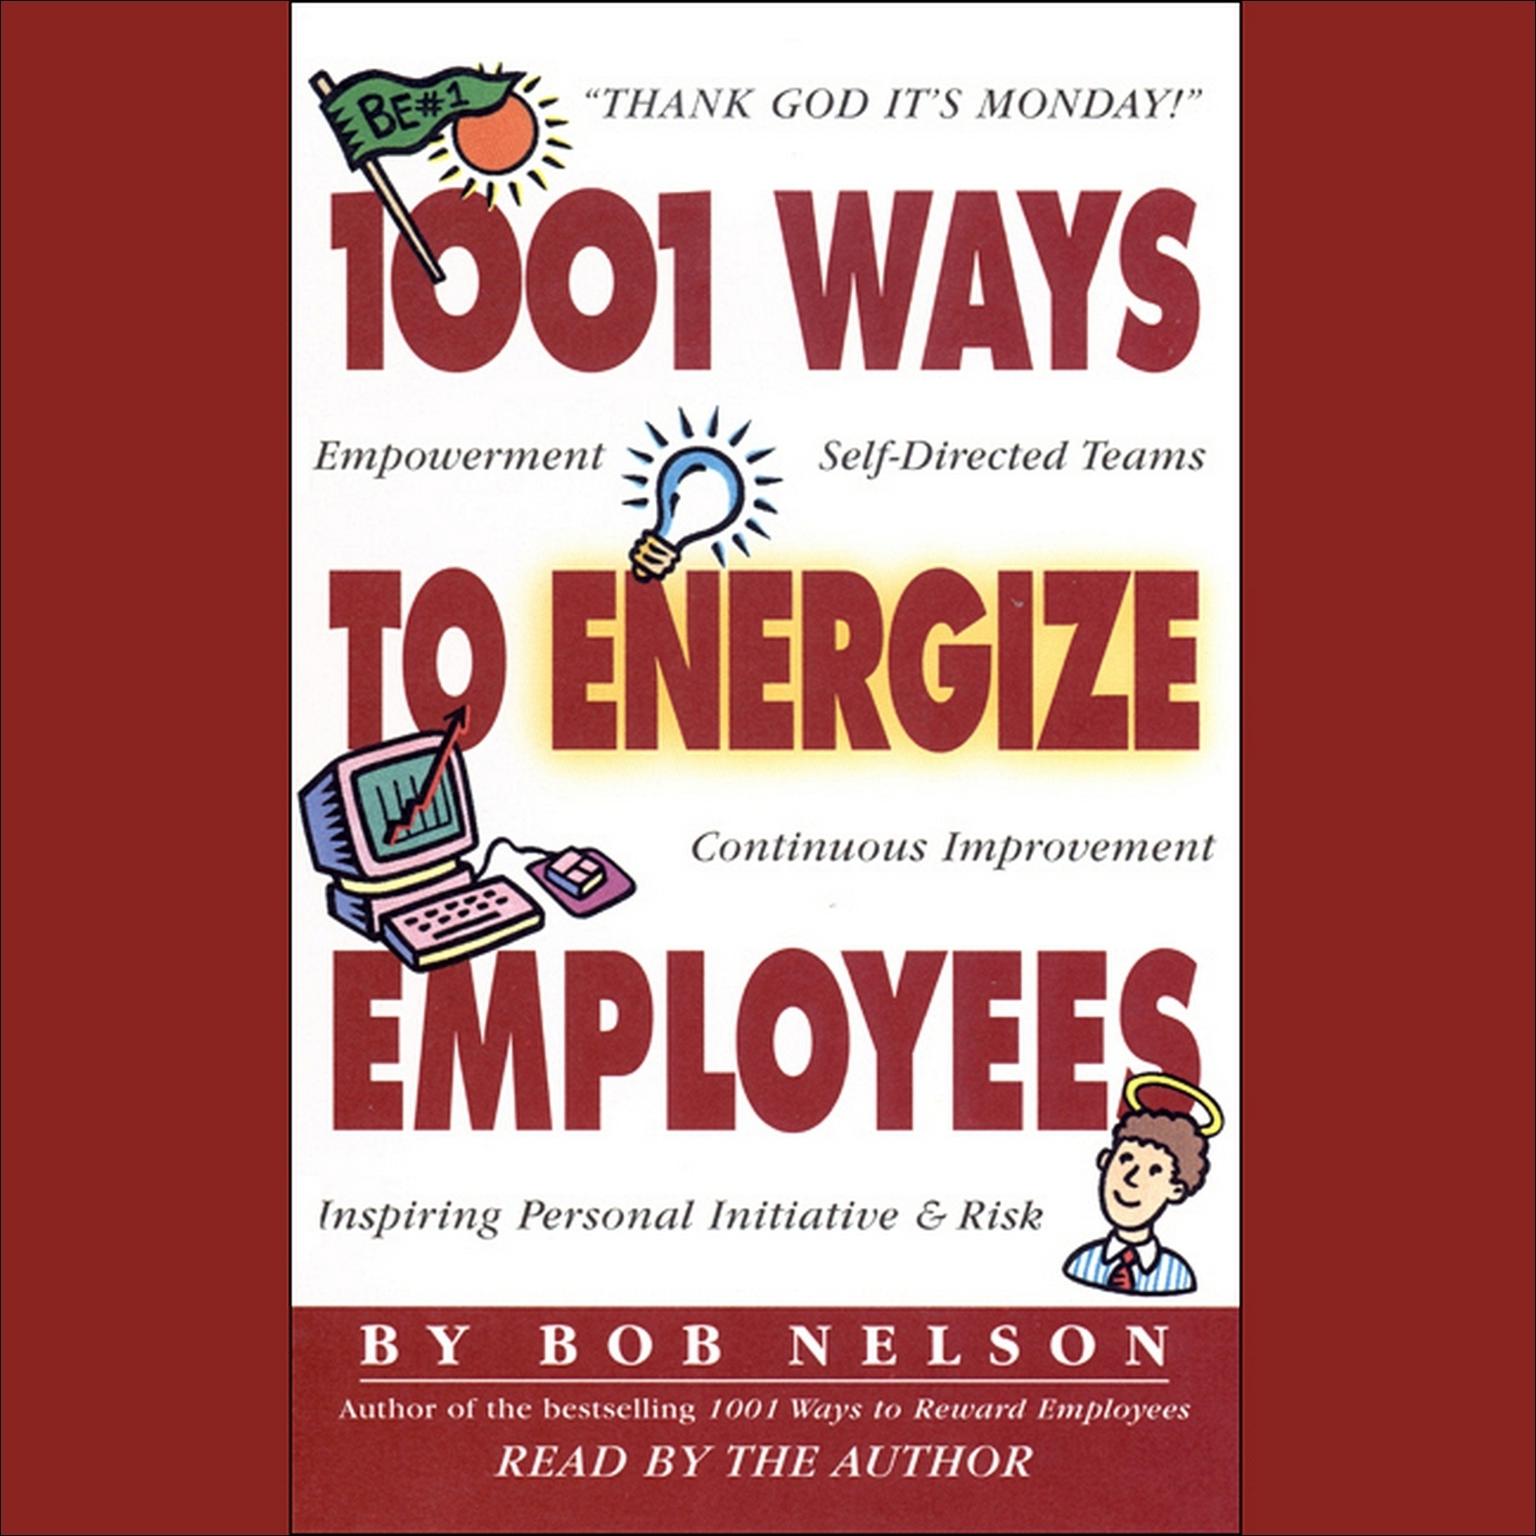 1001 Ways to Energize Employees (Abridged) Audiobook, by Bob Nelson